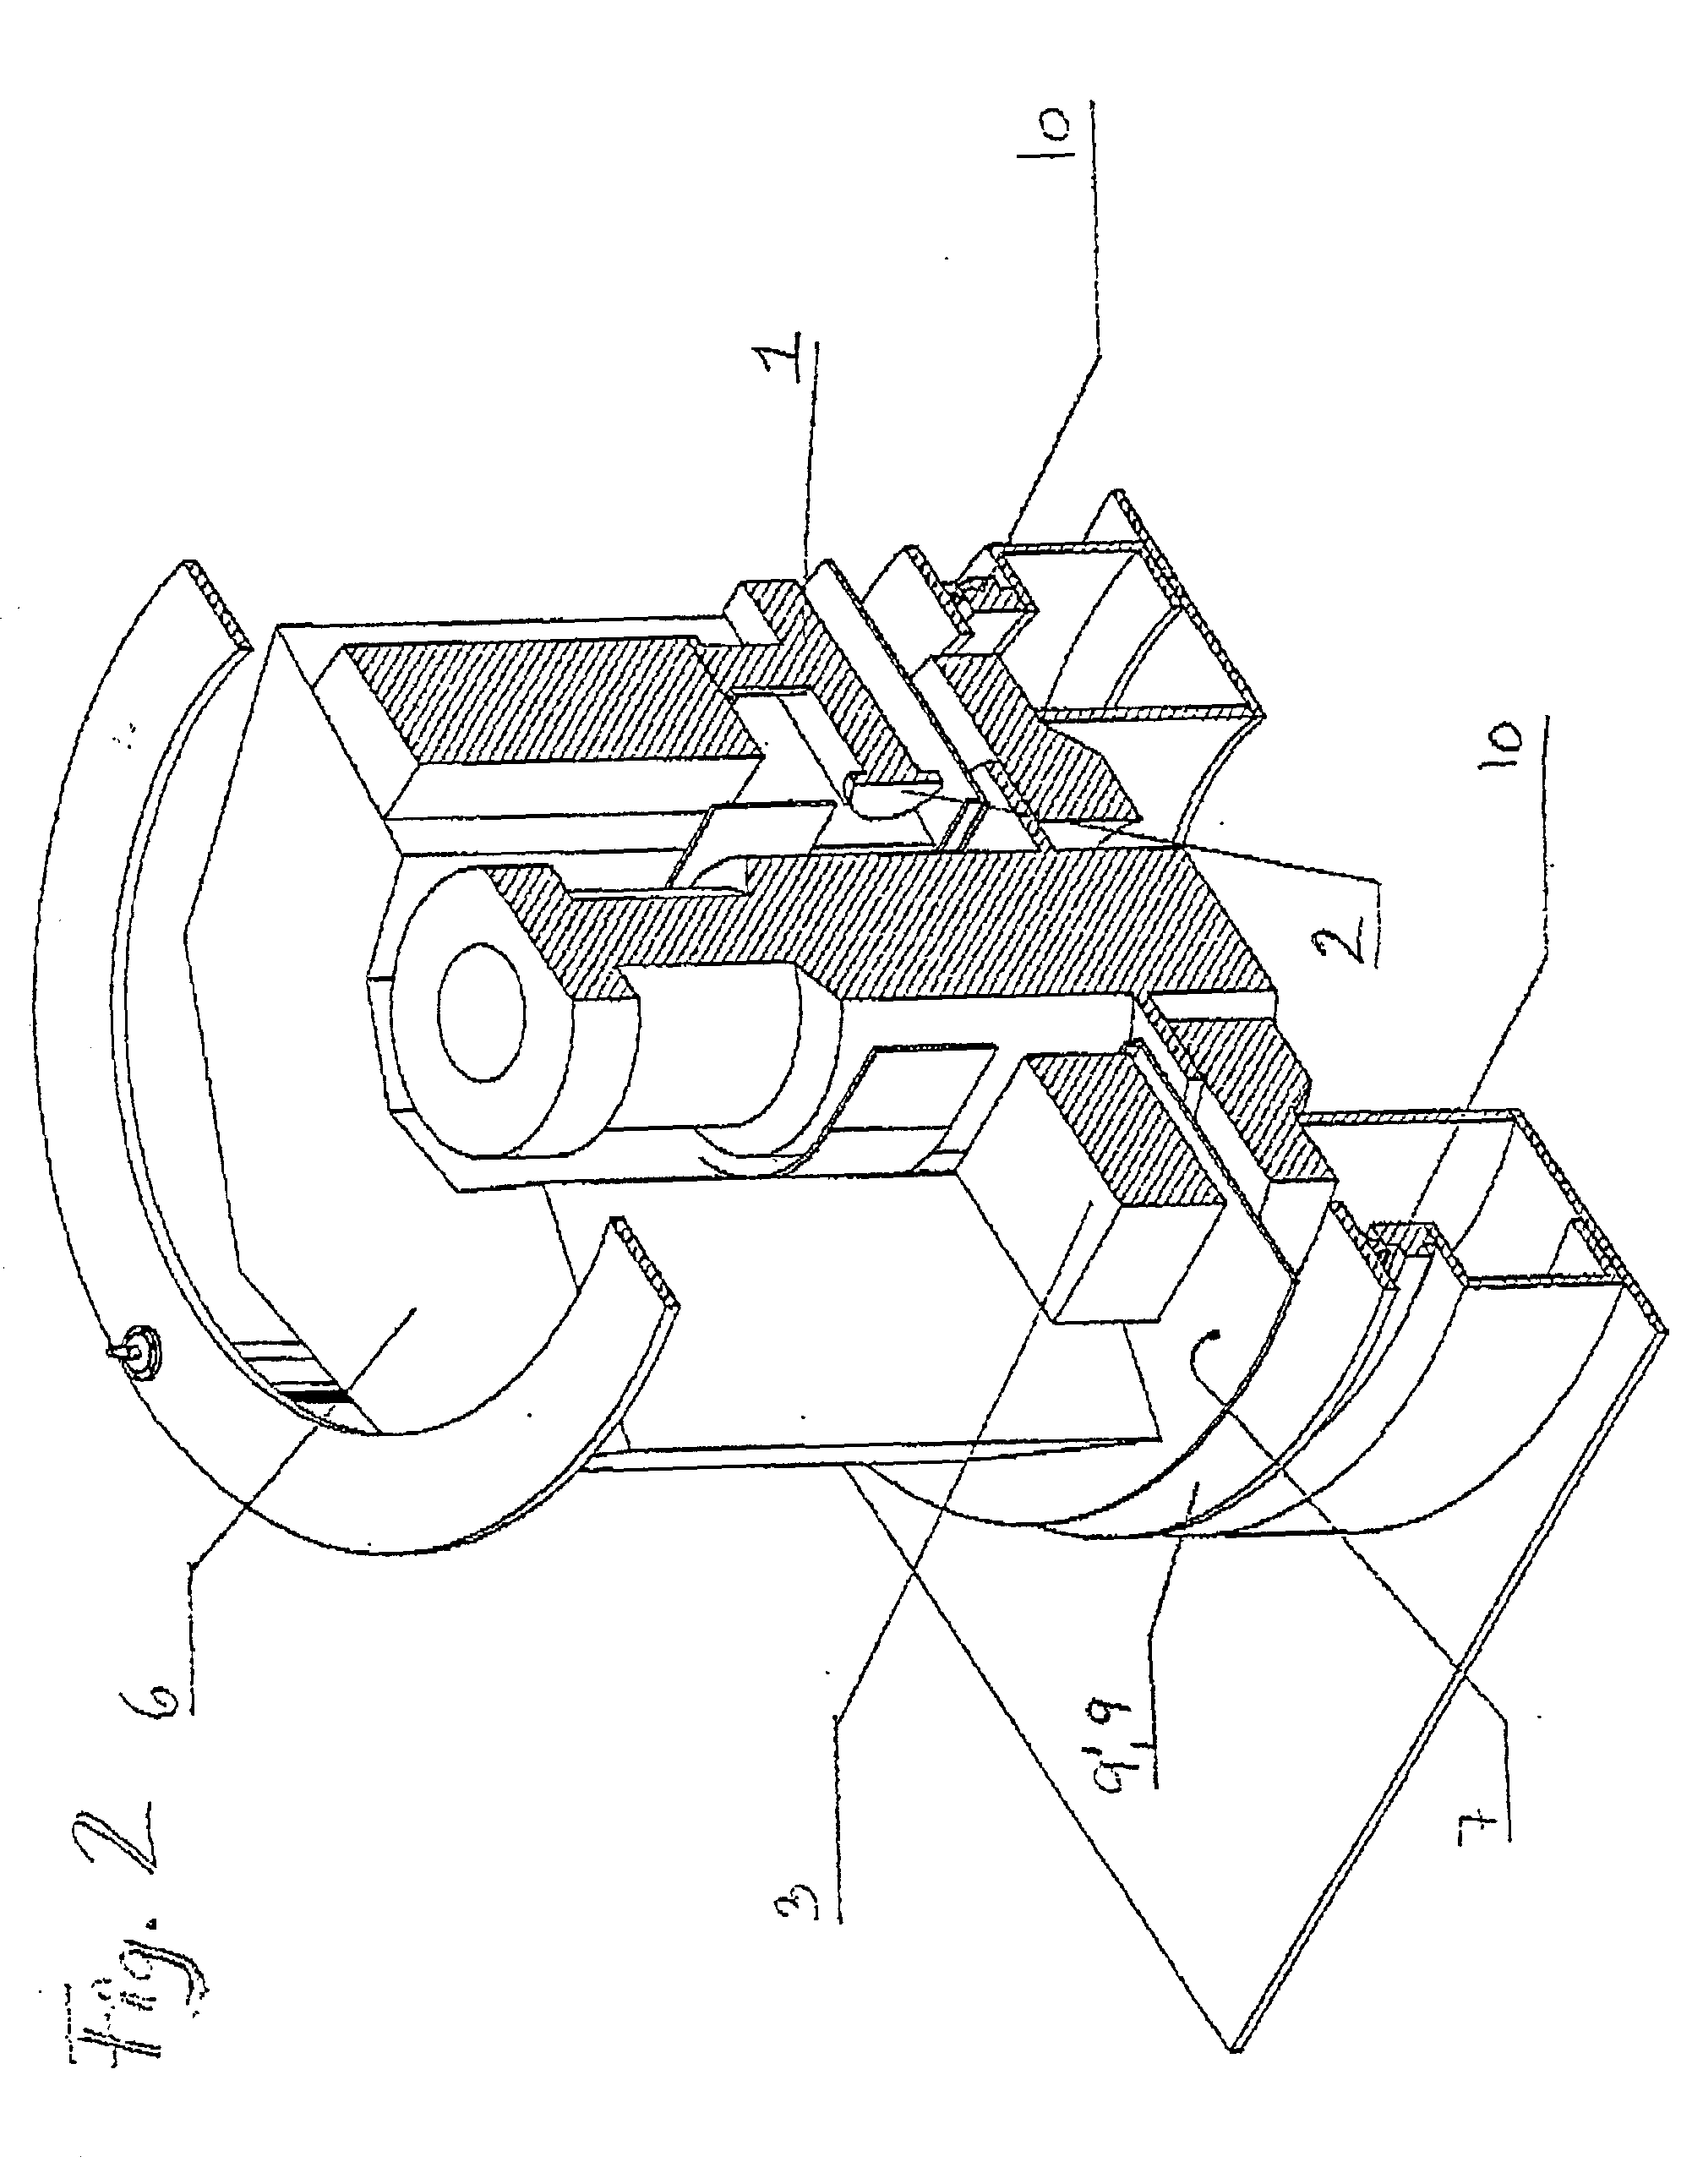 Device and method for tomography and digital x-ray radiography of a flexible riser